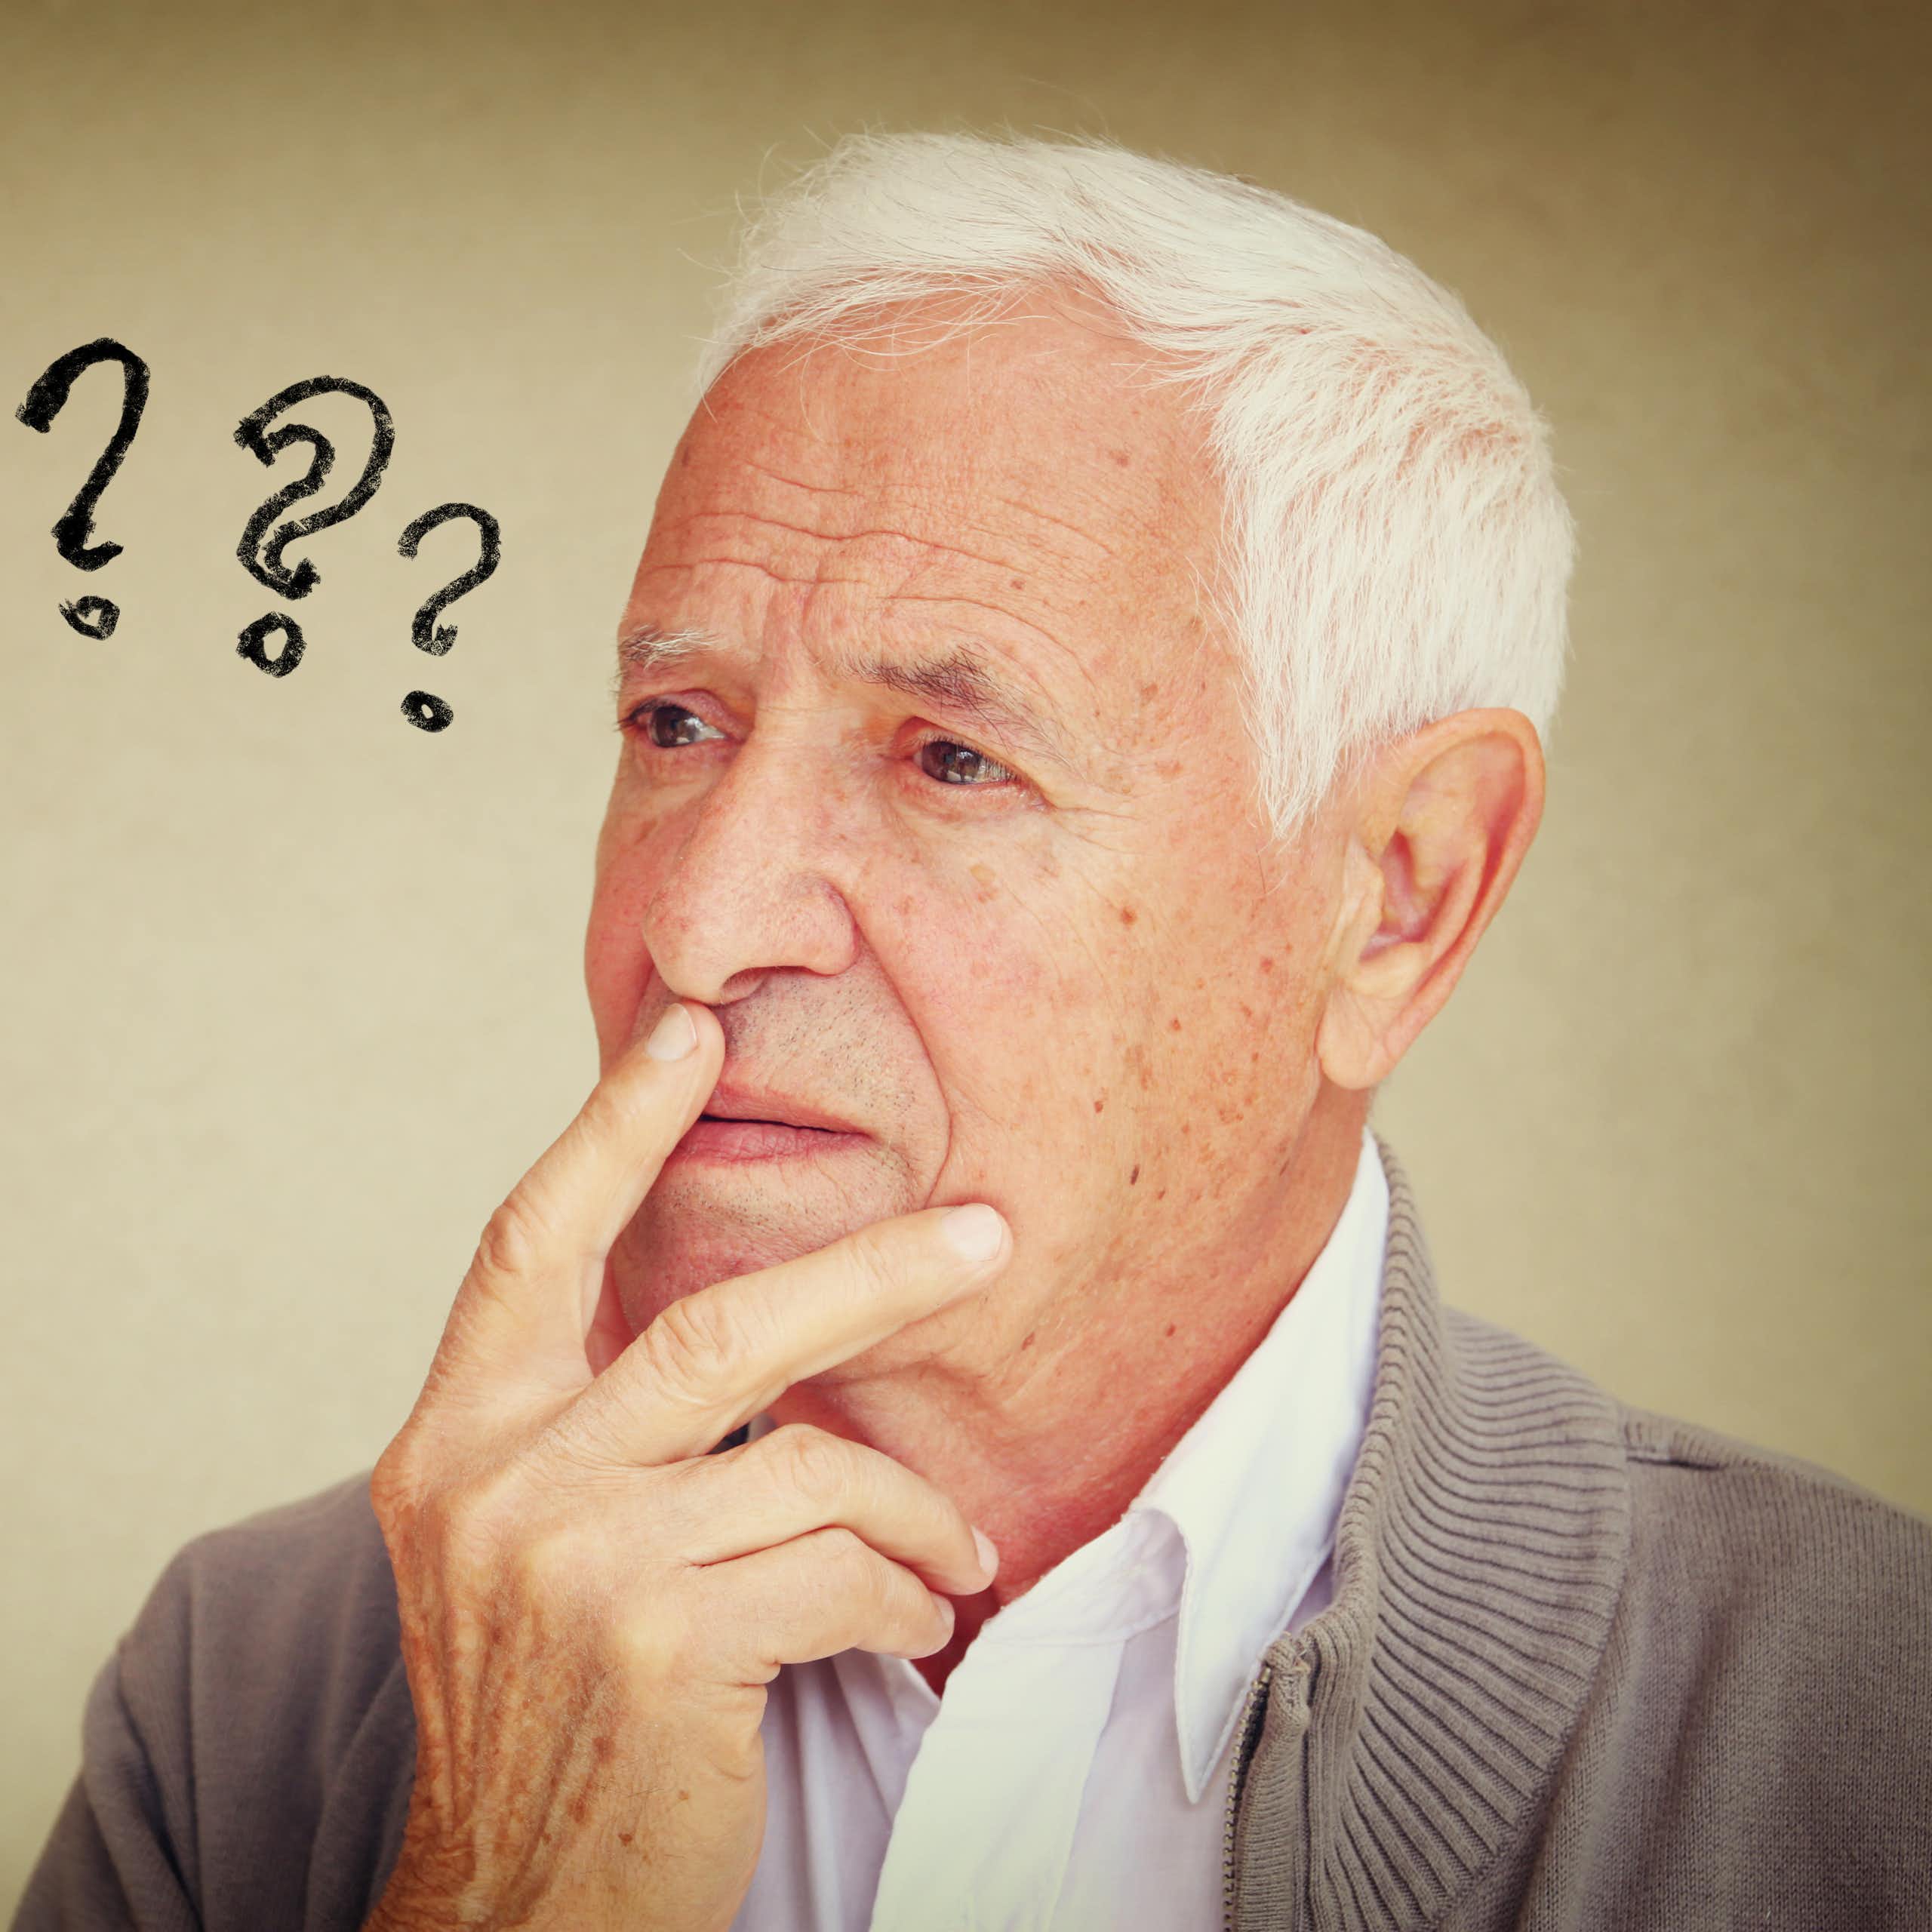 Older man with question marks next to his head